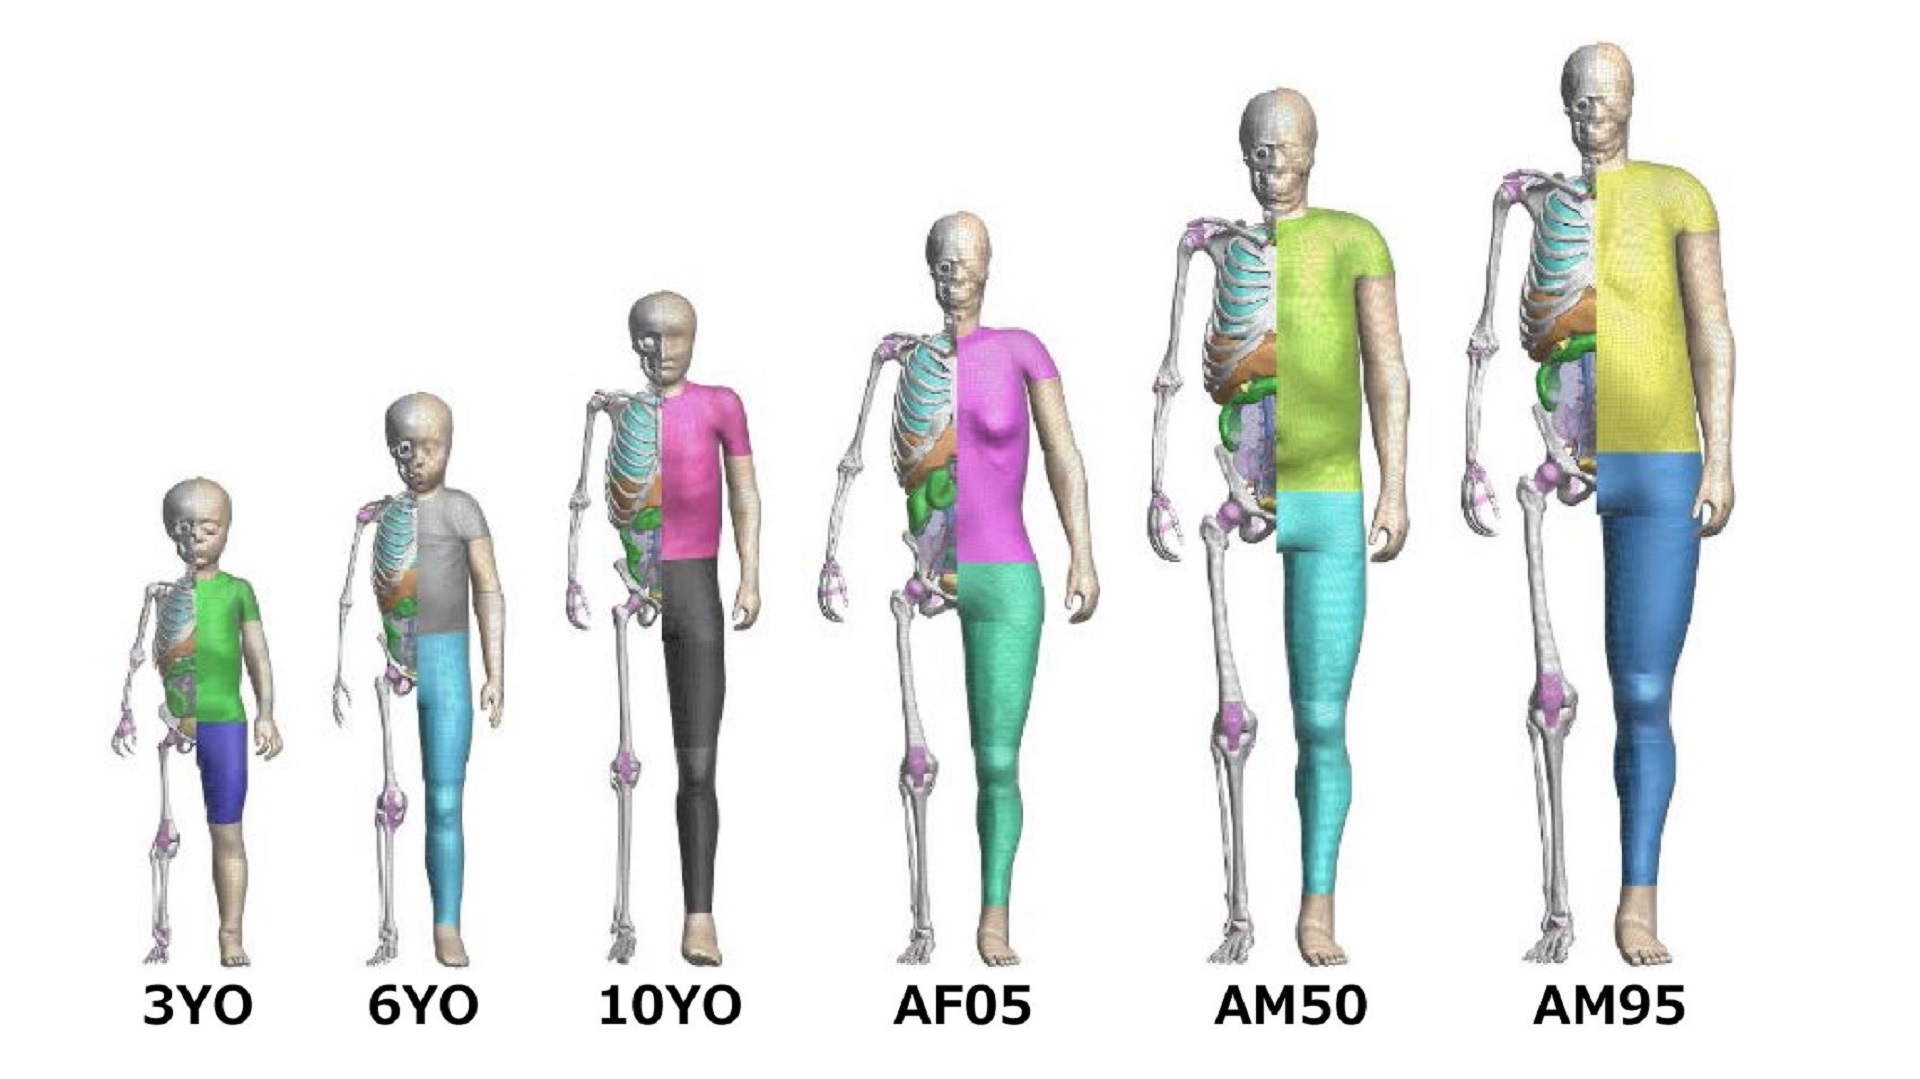 Toyota provides free access to Total Human Model for Safety 